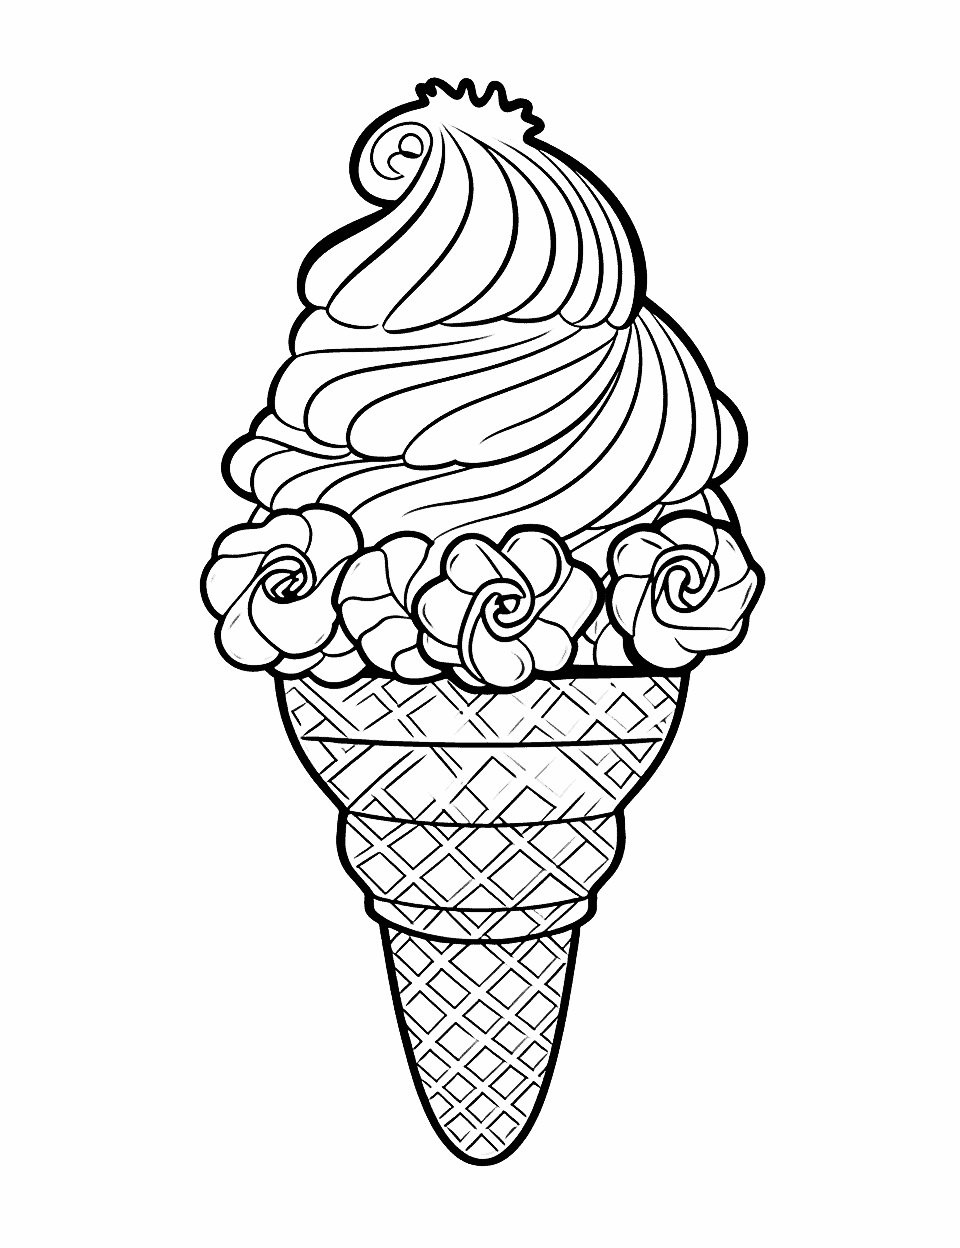 Ice cream coloring pages free printable sheets